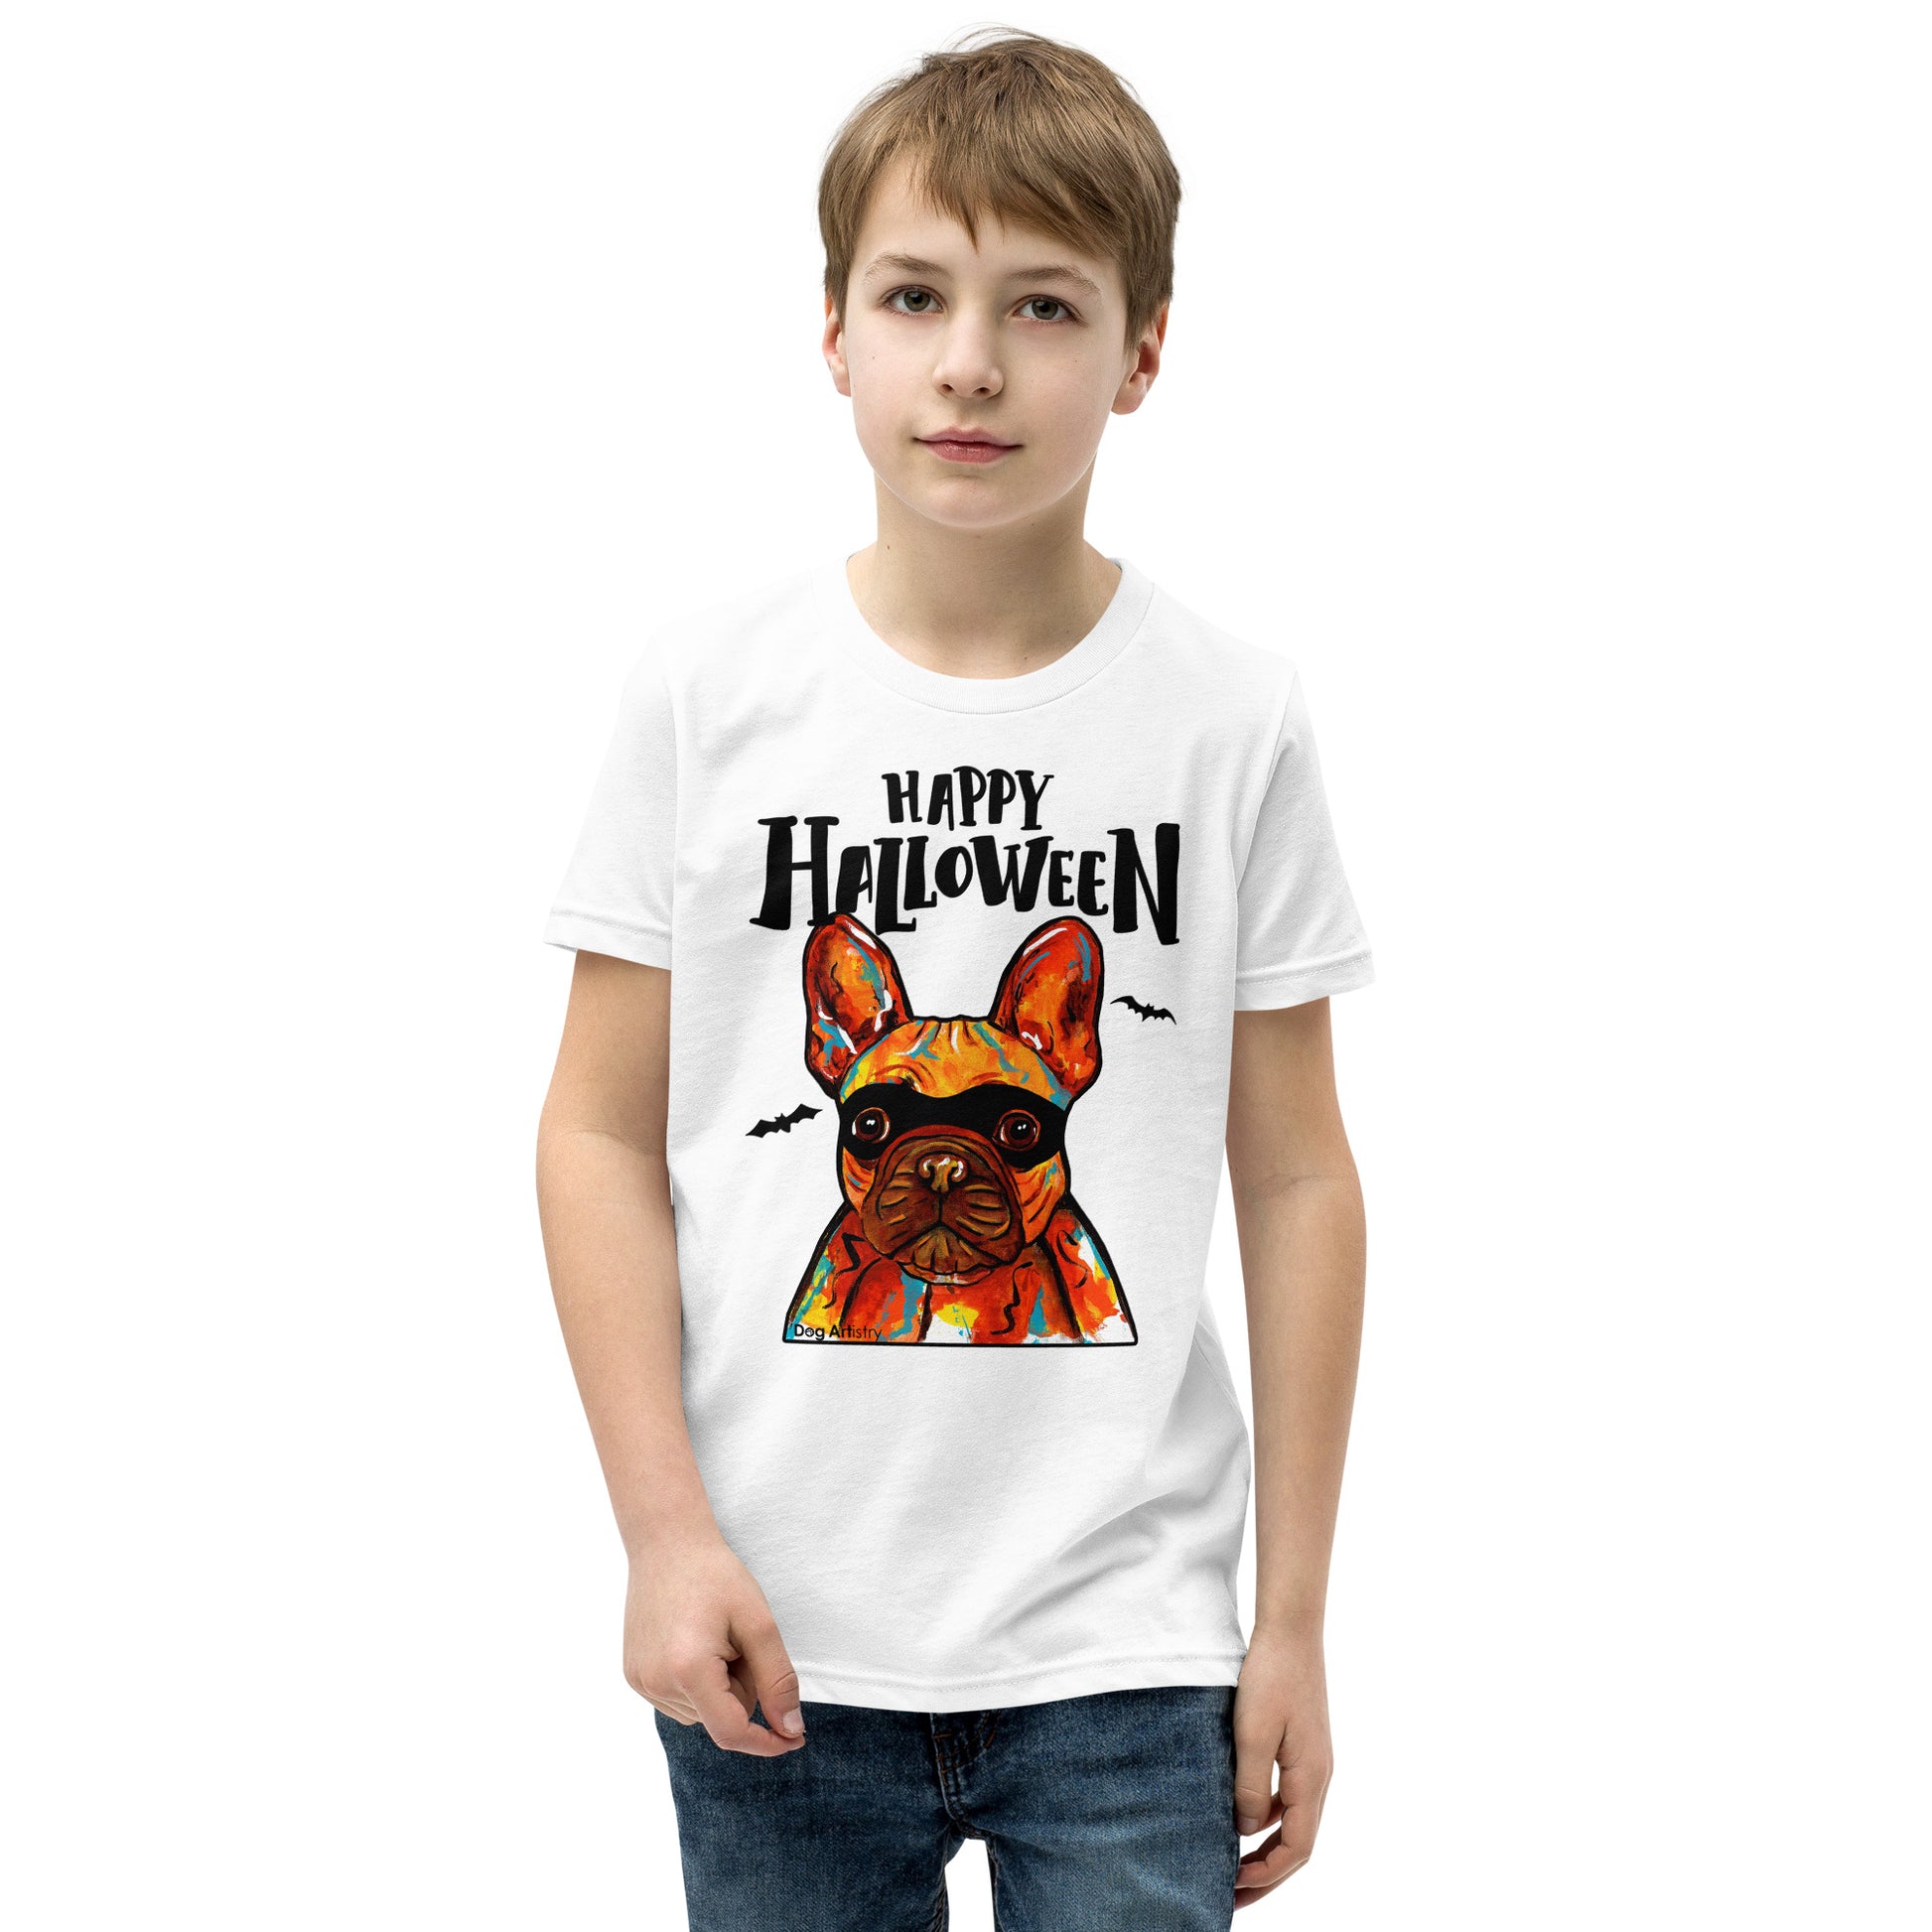 Funny Happy Halloween French Bulldog wearing mask youth white t-shirt by Dog Artistry.